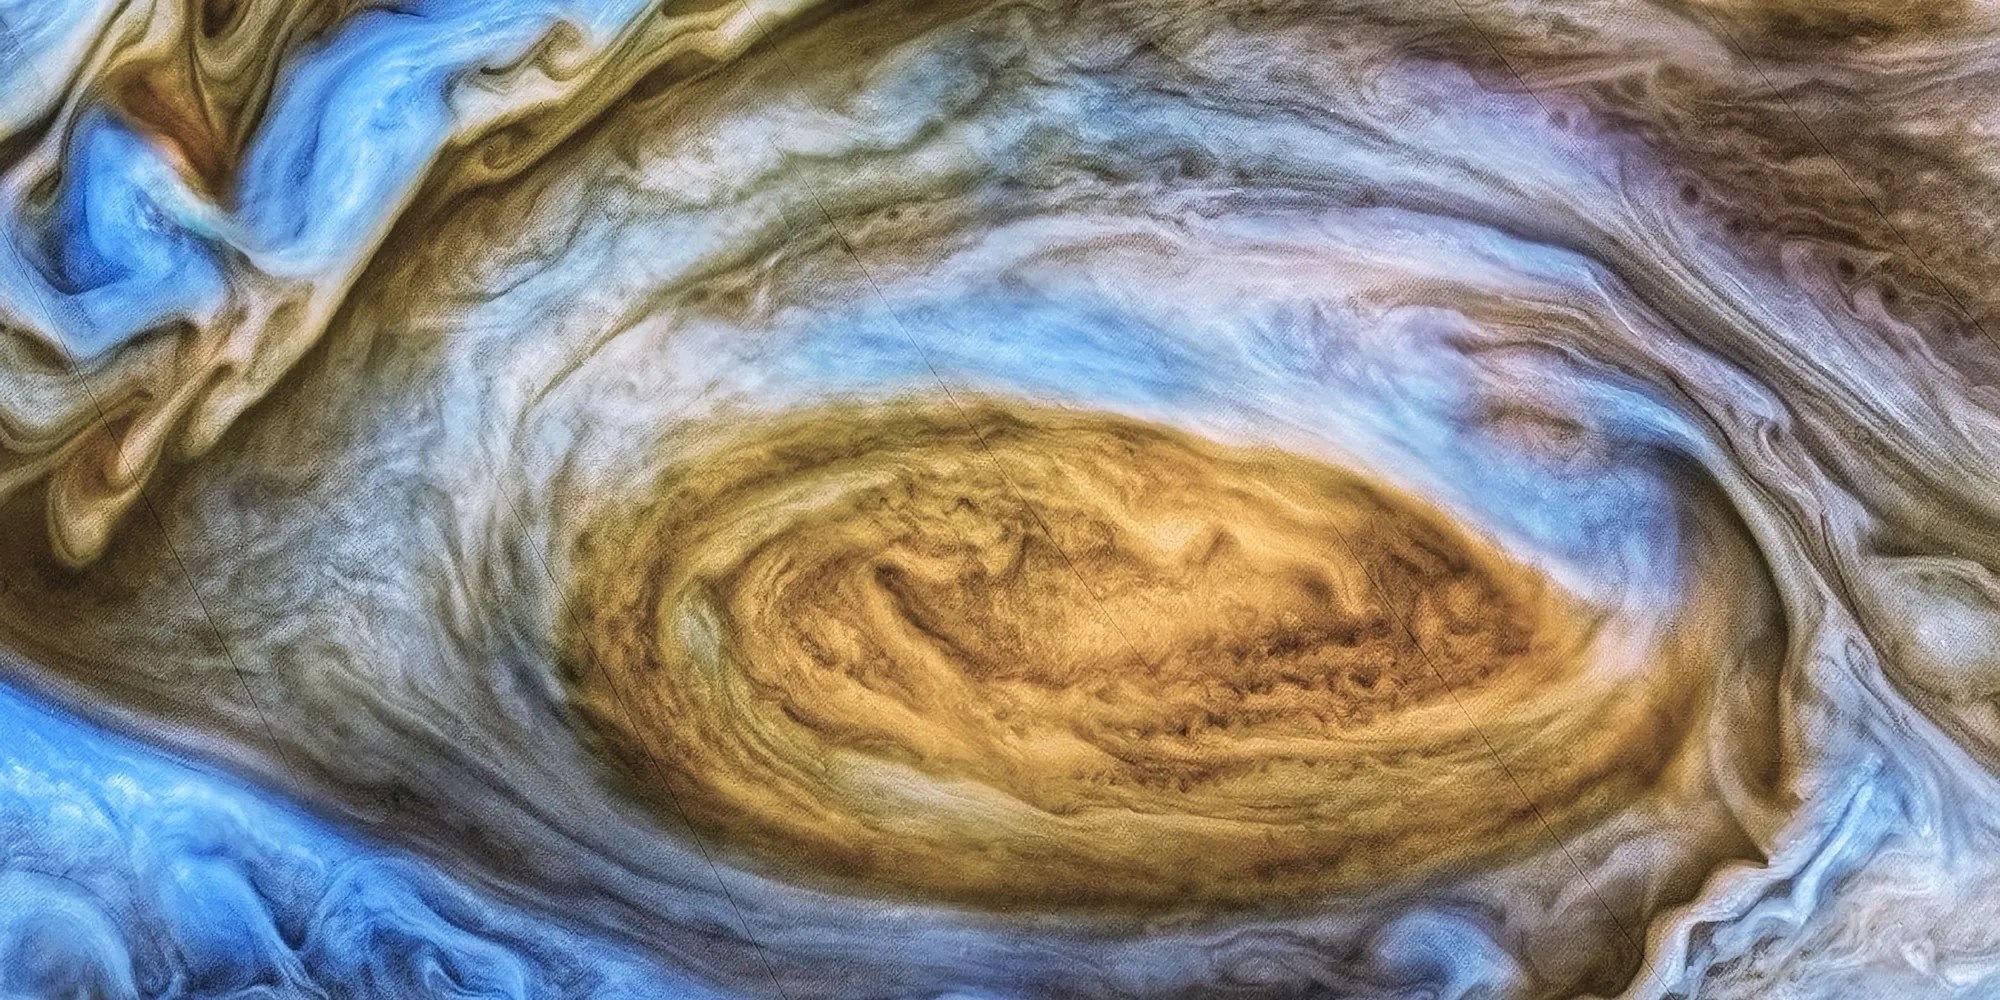 We May Soon Find Out Why Jupiters Great Red Spot Is Shrinking